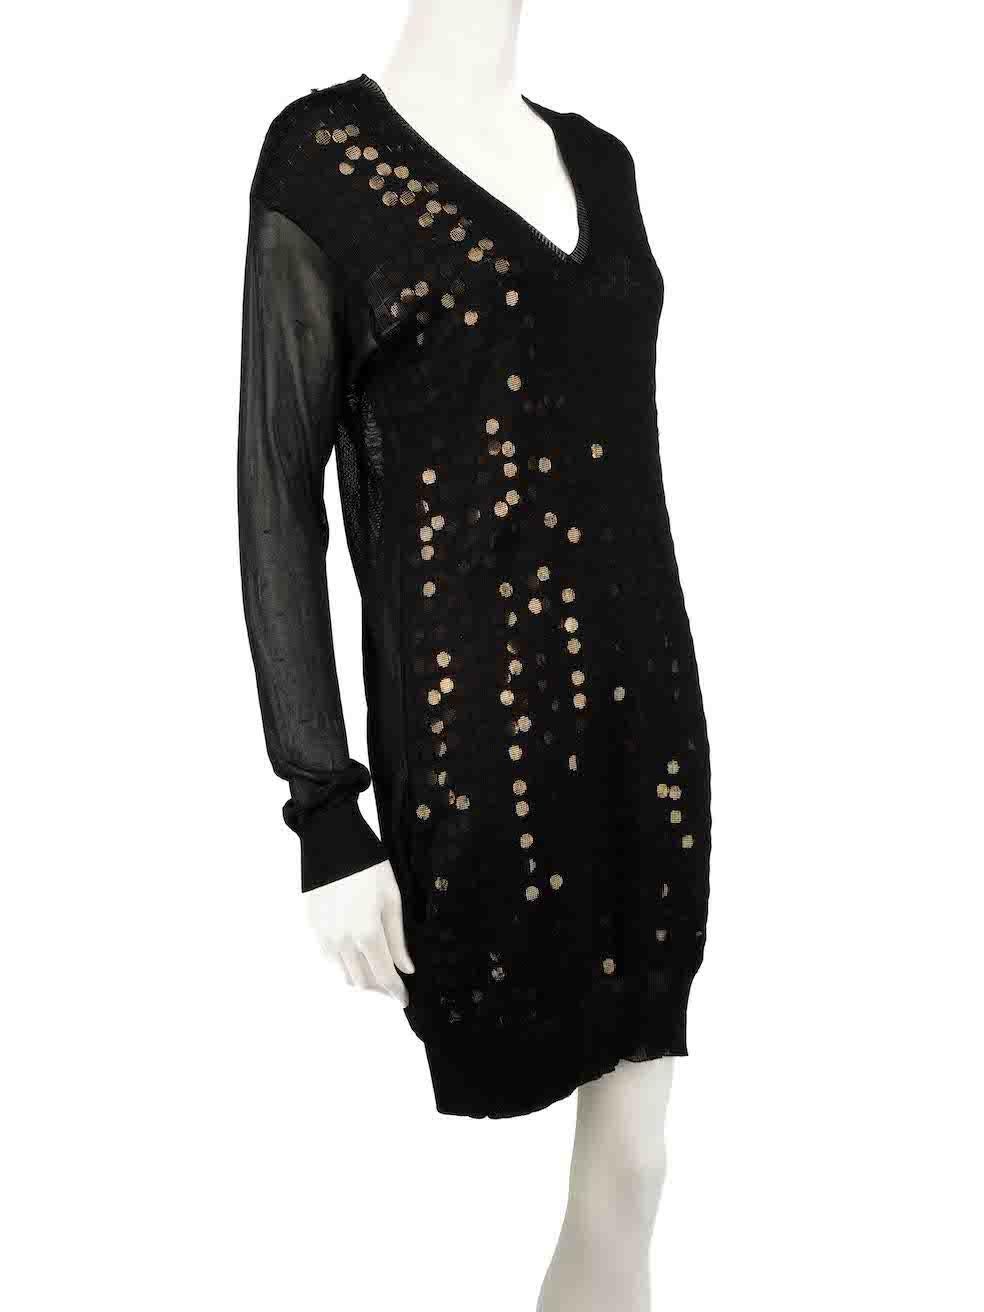 CONDITION is Good. Minor wear to dress is evident. Light wear to the composition with a handful of small plucks and pulls to the knit found over the right shoulder on this used Stella McCartney designer resale item.
 
 
 
 Details
 
 
 Black
 
